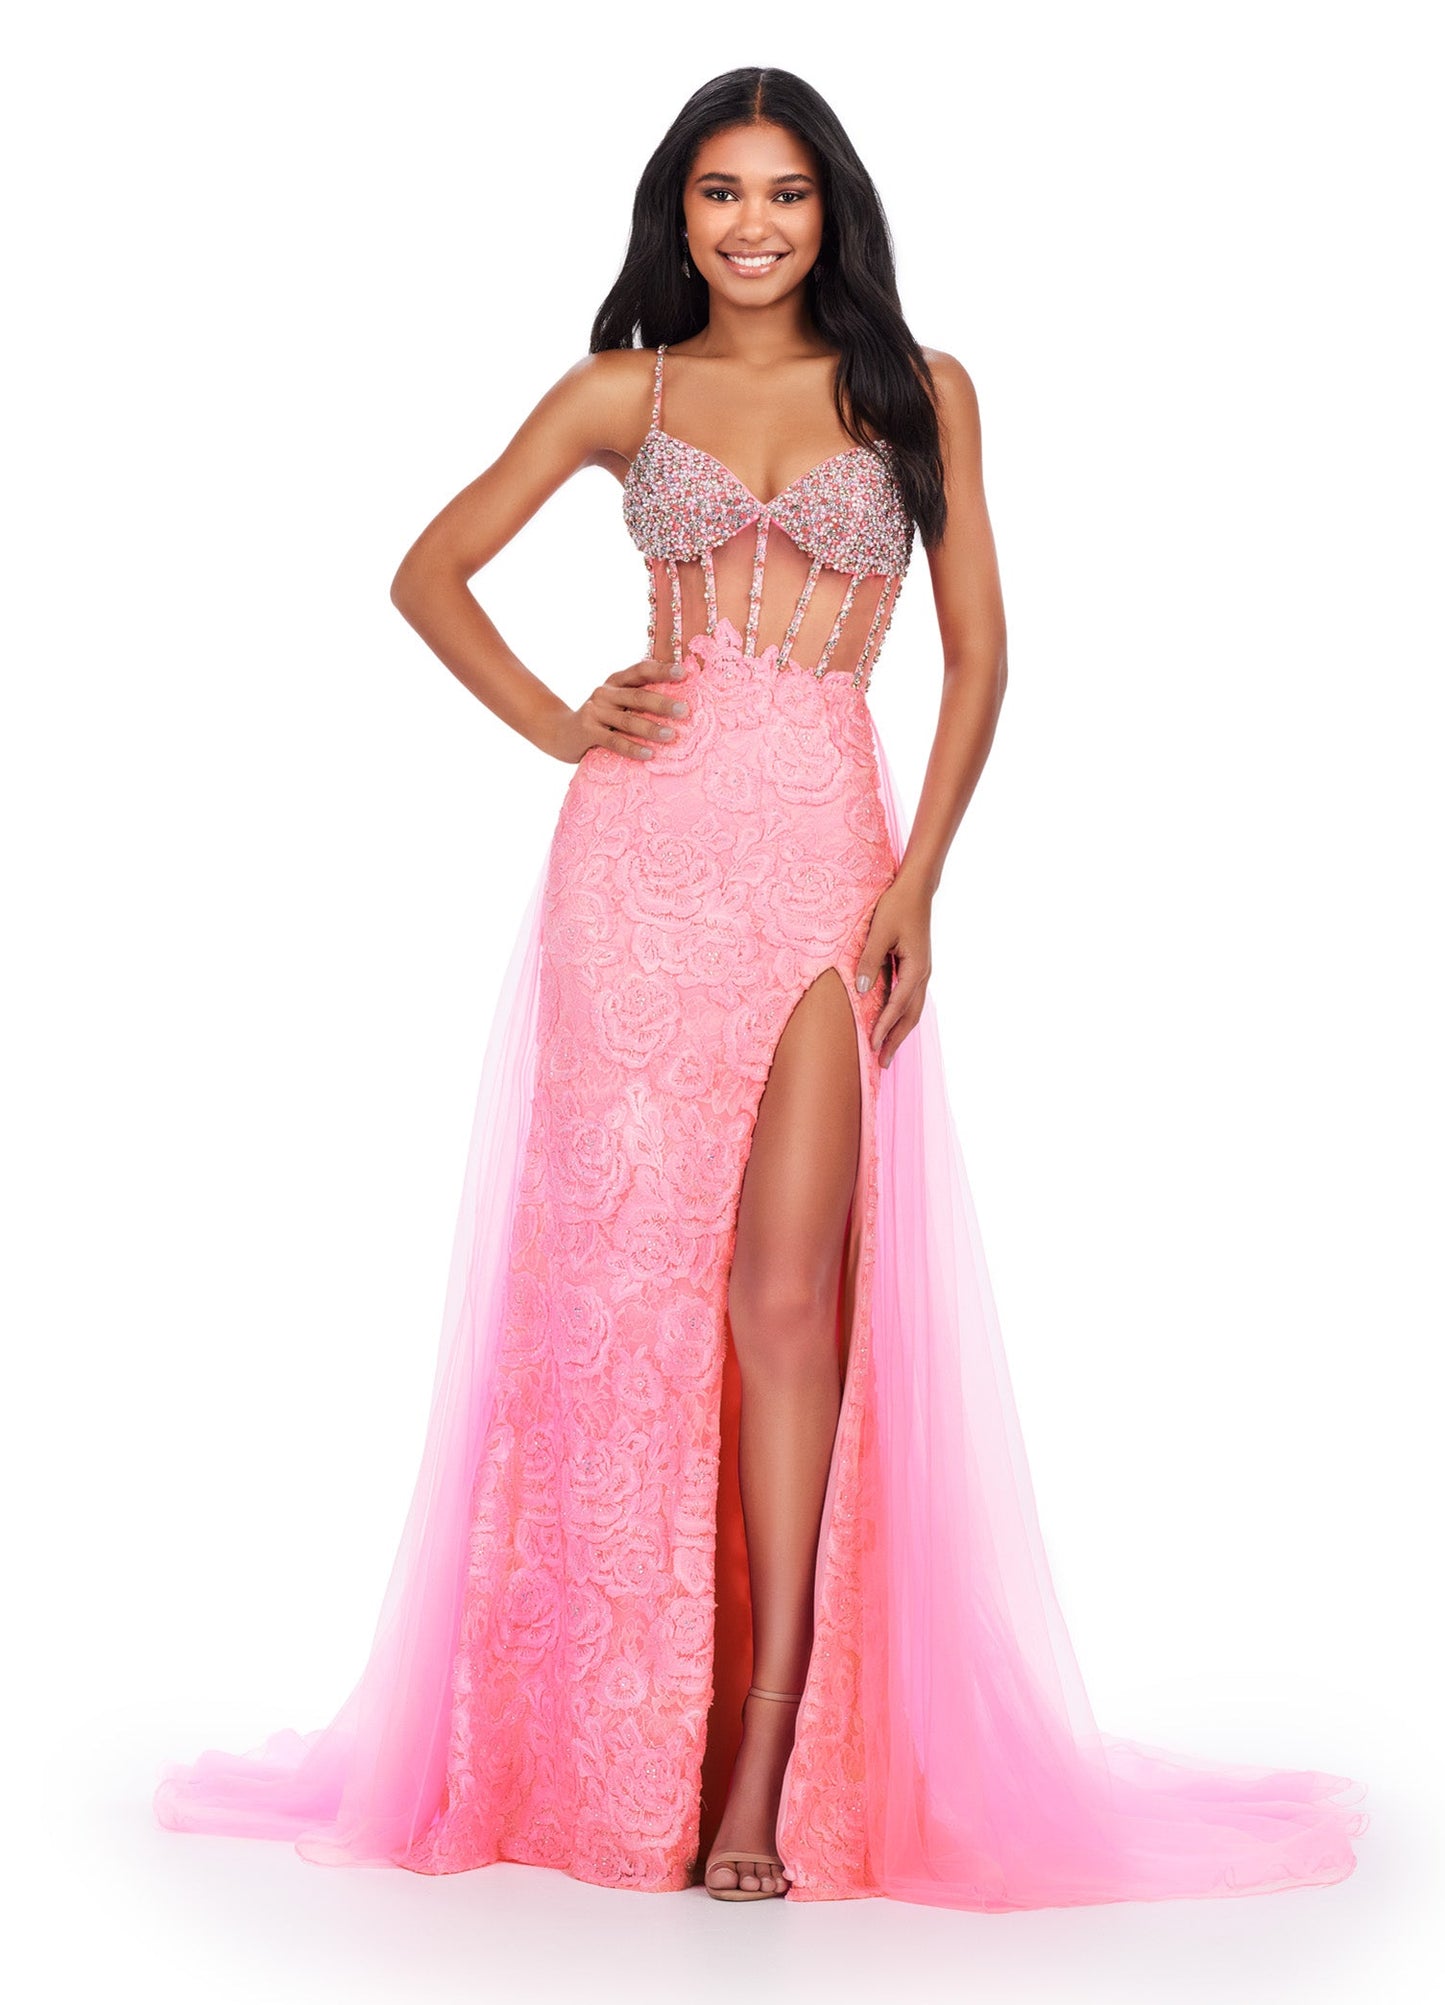 Be the star of the show in the Ashley Lauren 11517 Sheer Crystal Corset Lace Dress. Featuring a stunning corset lace bodice and sheer overskirt with a daring slit, this prom pageant gown is designed to make you stand out. Add a touch of glamour with crystal details and feel confident in this elegant and feminine dress. This romantic lace applique spaghetti strap gown features a beaded corset bustier. The look is completed a tulle overskirt.